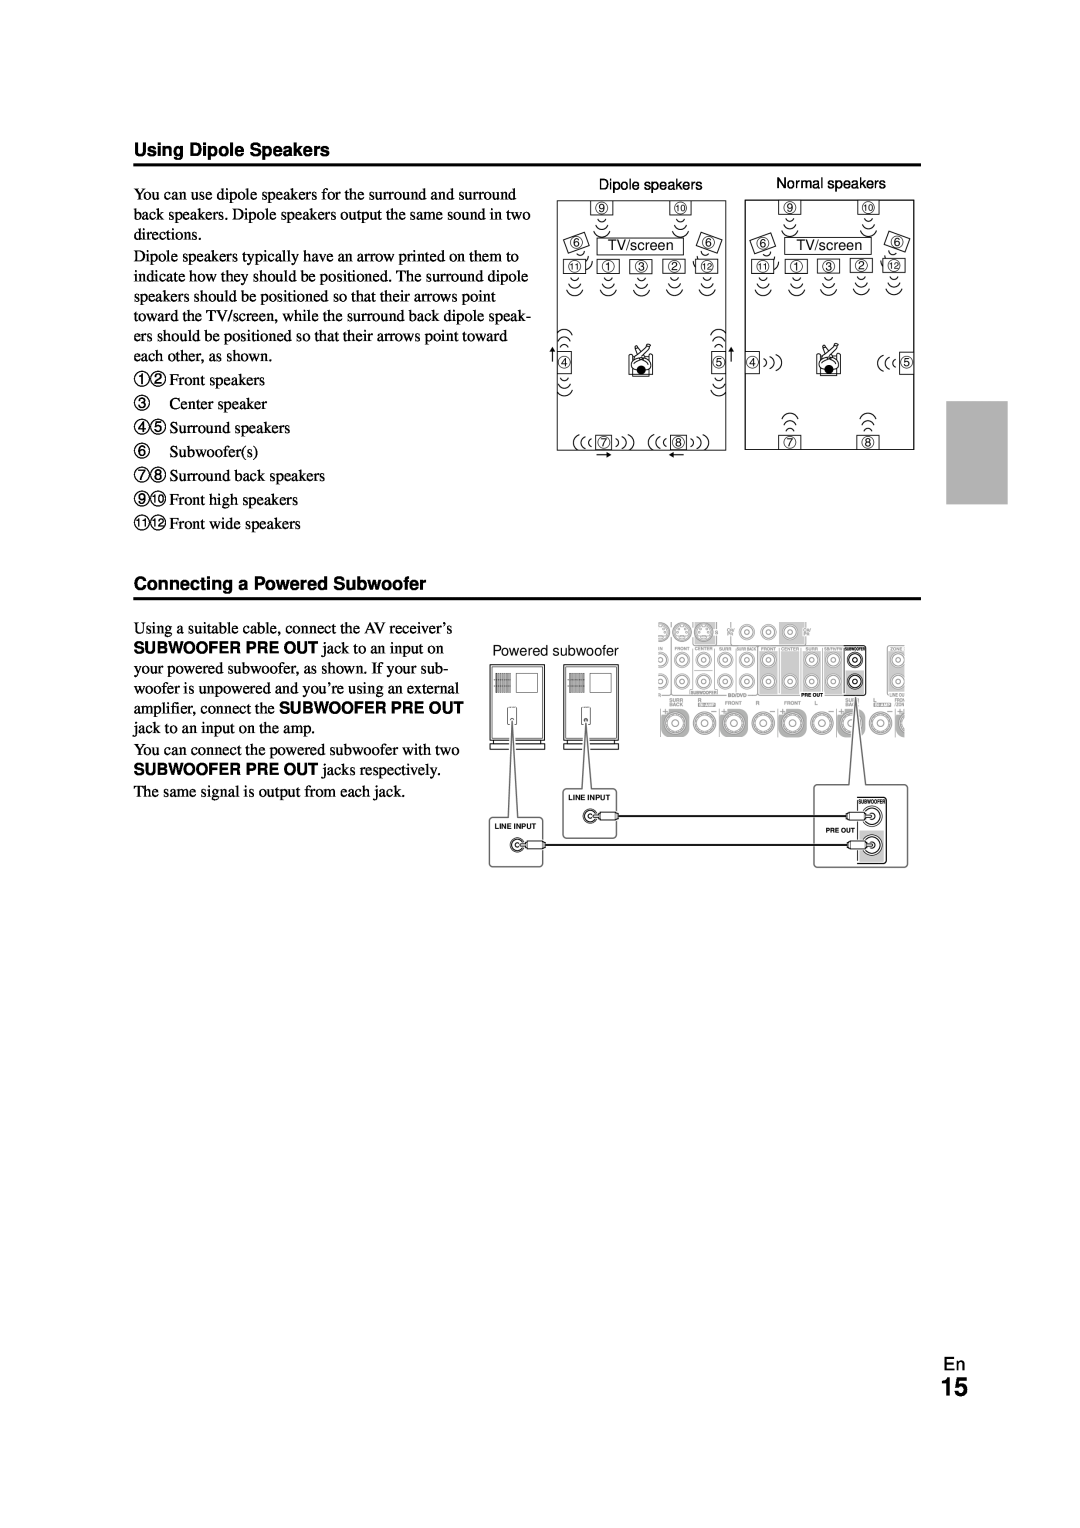 Onkyo HT-RC270 instruction manual Using Dipole Speakers, Connecting a Powered Subwoofer 